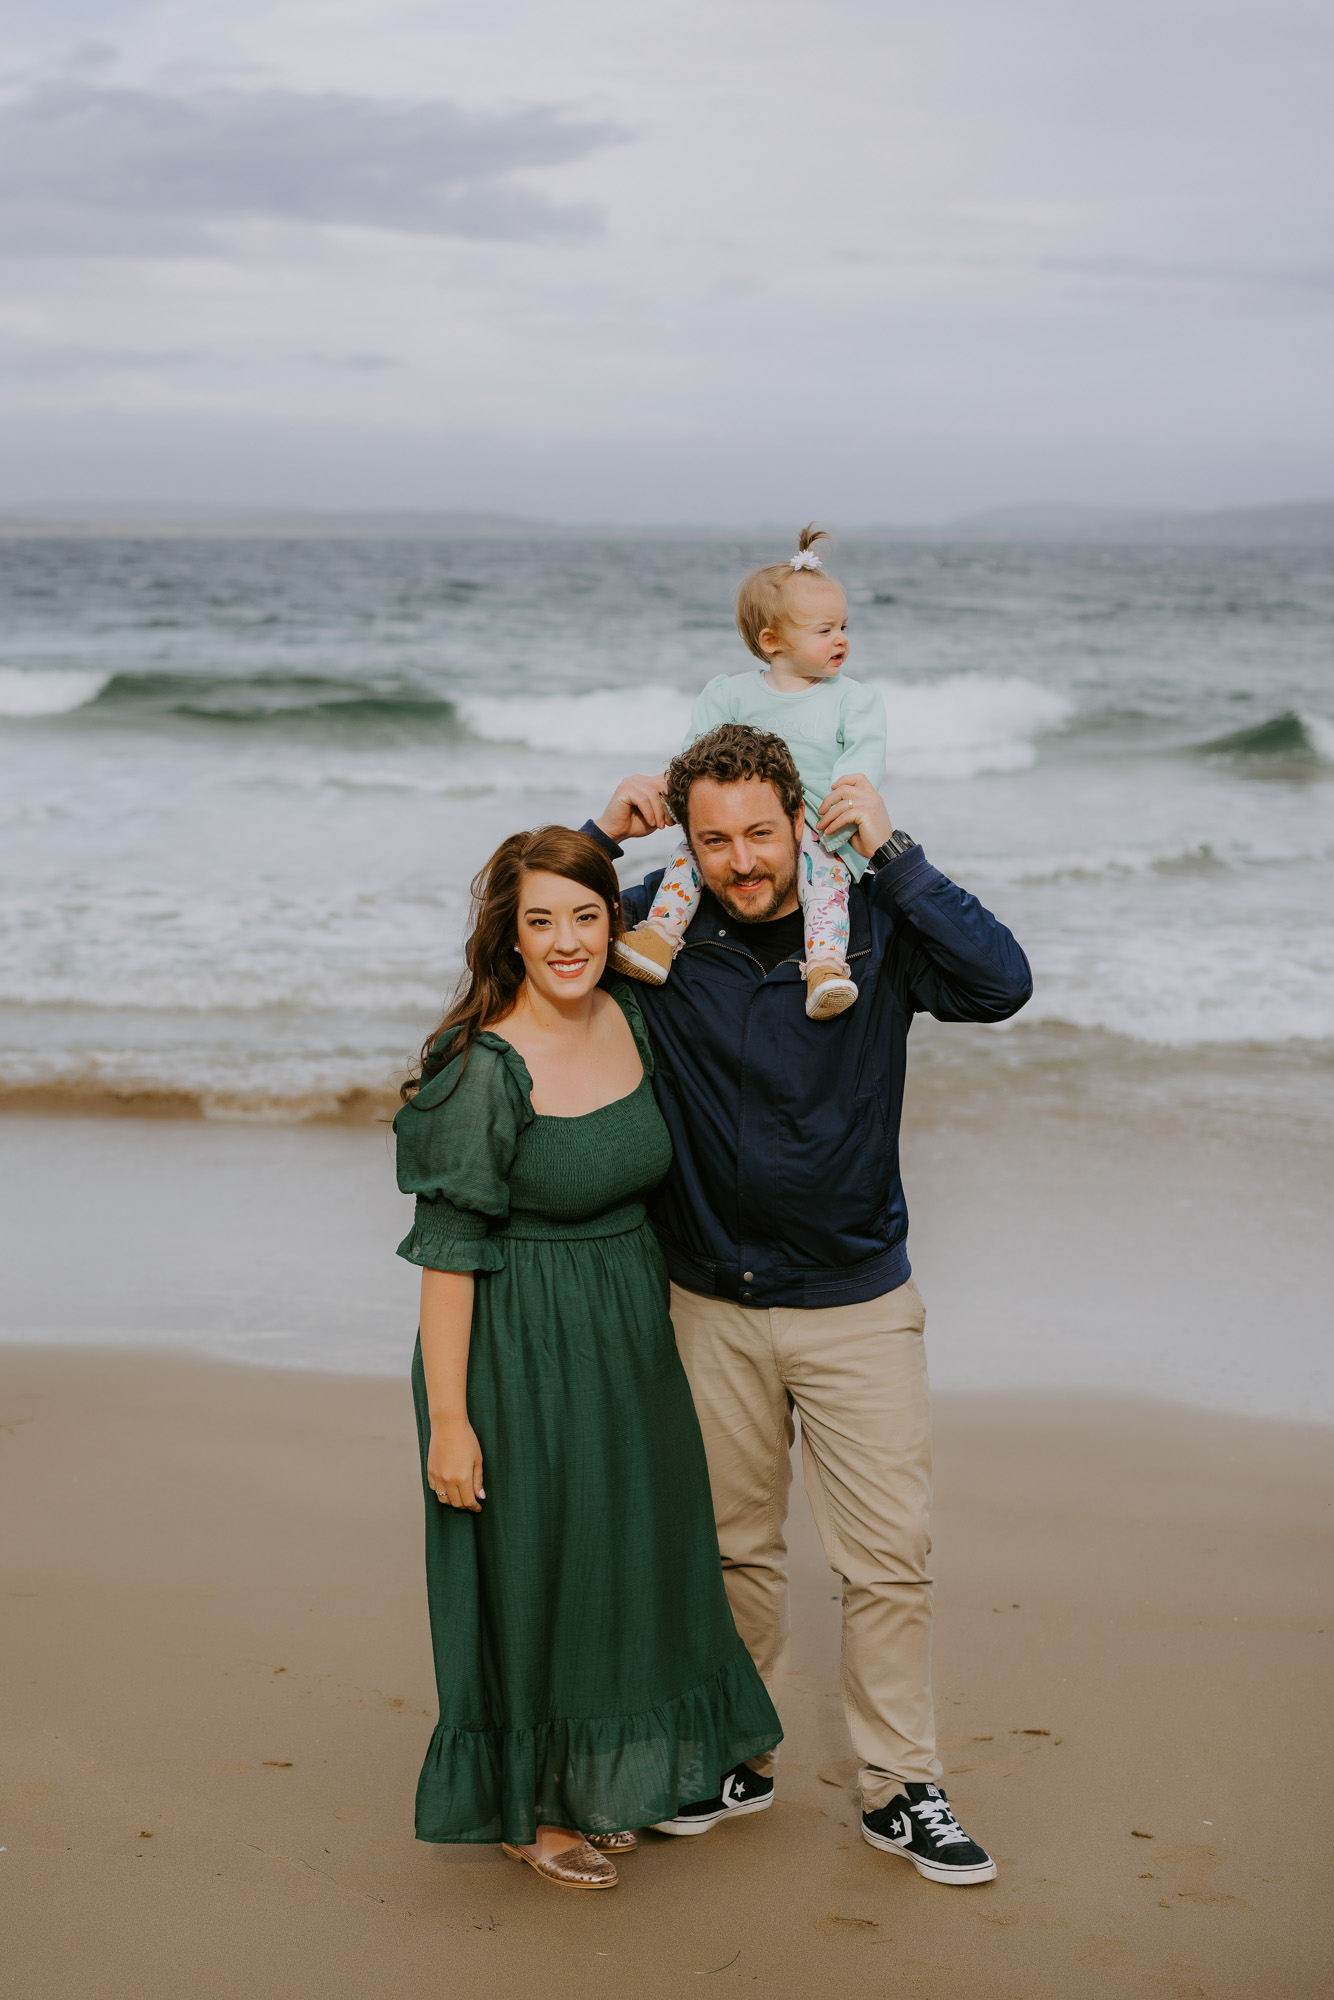 Blackmans Bay Beach Family by Ulla Nordwood – 0004